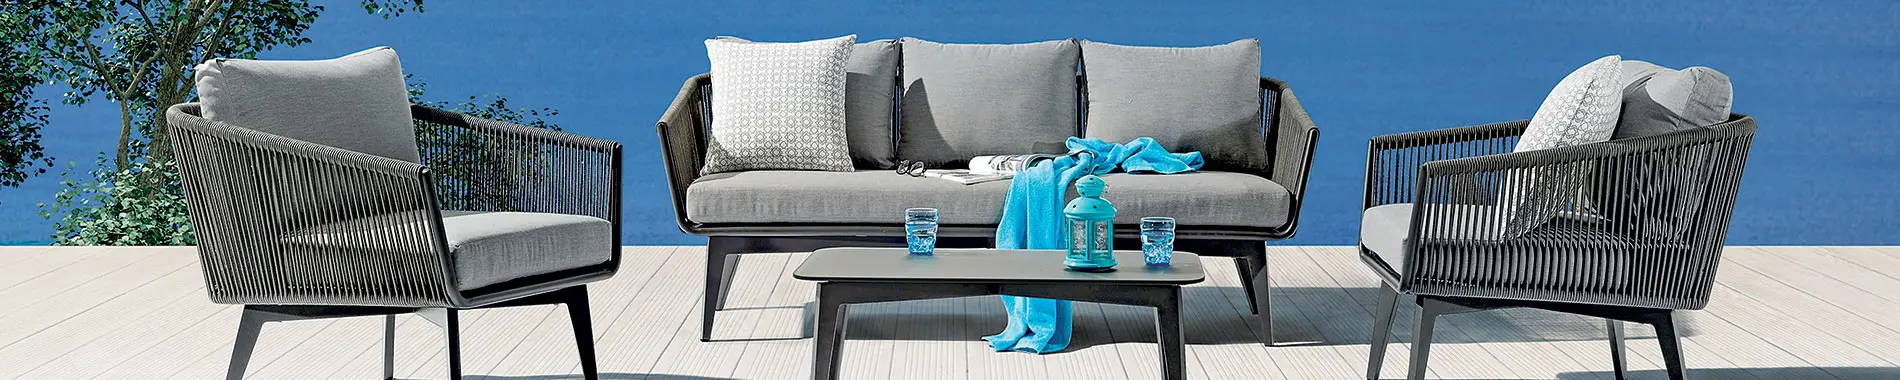 Outdoor furniture from the collection: Diva